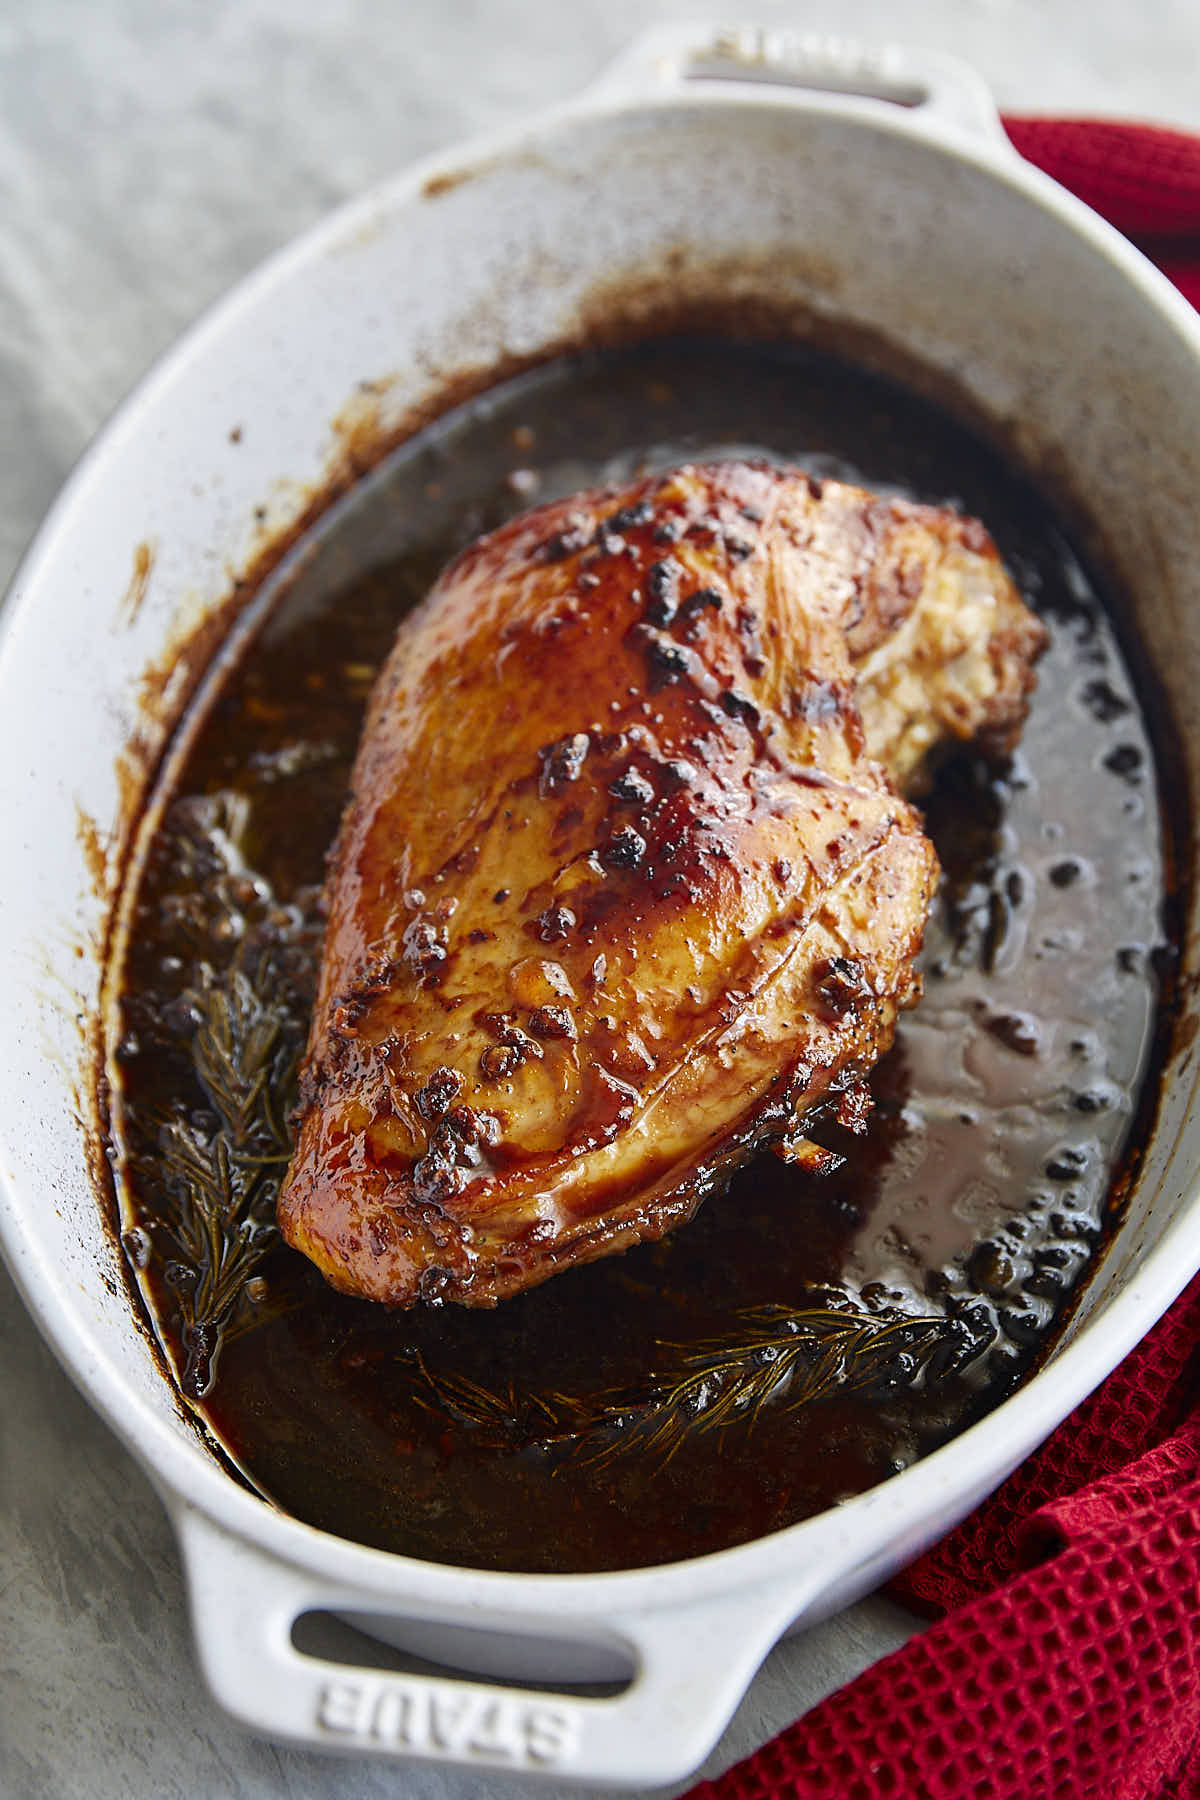 Full of Asian-inspired flavors, this turkey breast is first marinated in a delicious marinade to get flavor inside out, then roasted low and slow until tender, succulent perfection. 